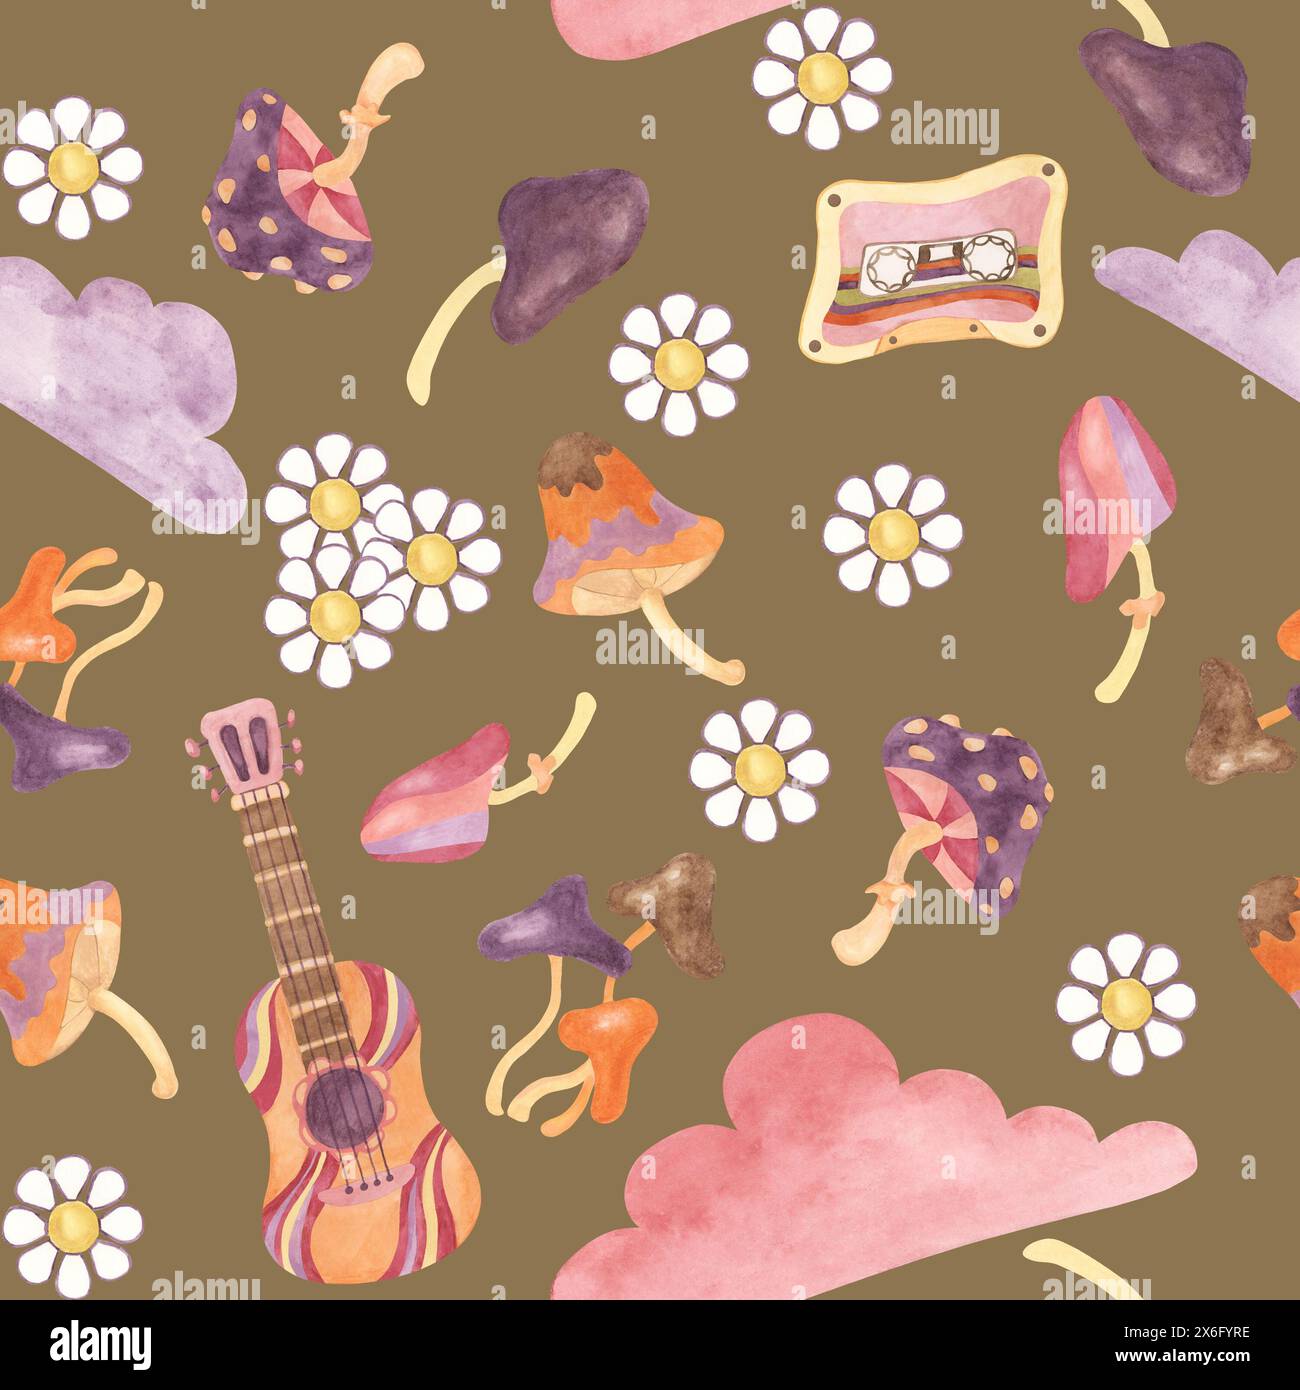 Seamless pattern with retro guitar, tape, clouds and mushrooms in watercolor. Vintage hippie music textile ornament clipart. Hand drawn nostalgic print for clothing, wallpaper, wrapping, scrapbooking Stock Photo